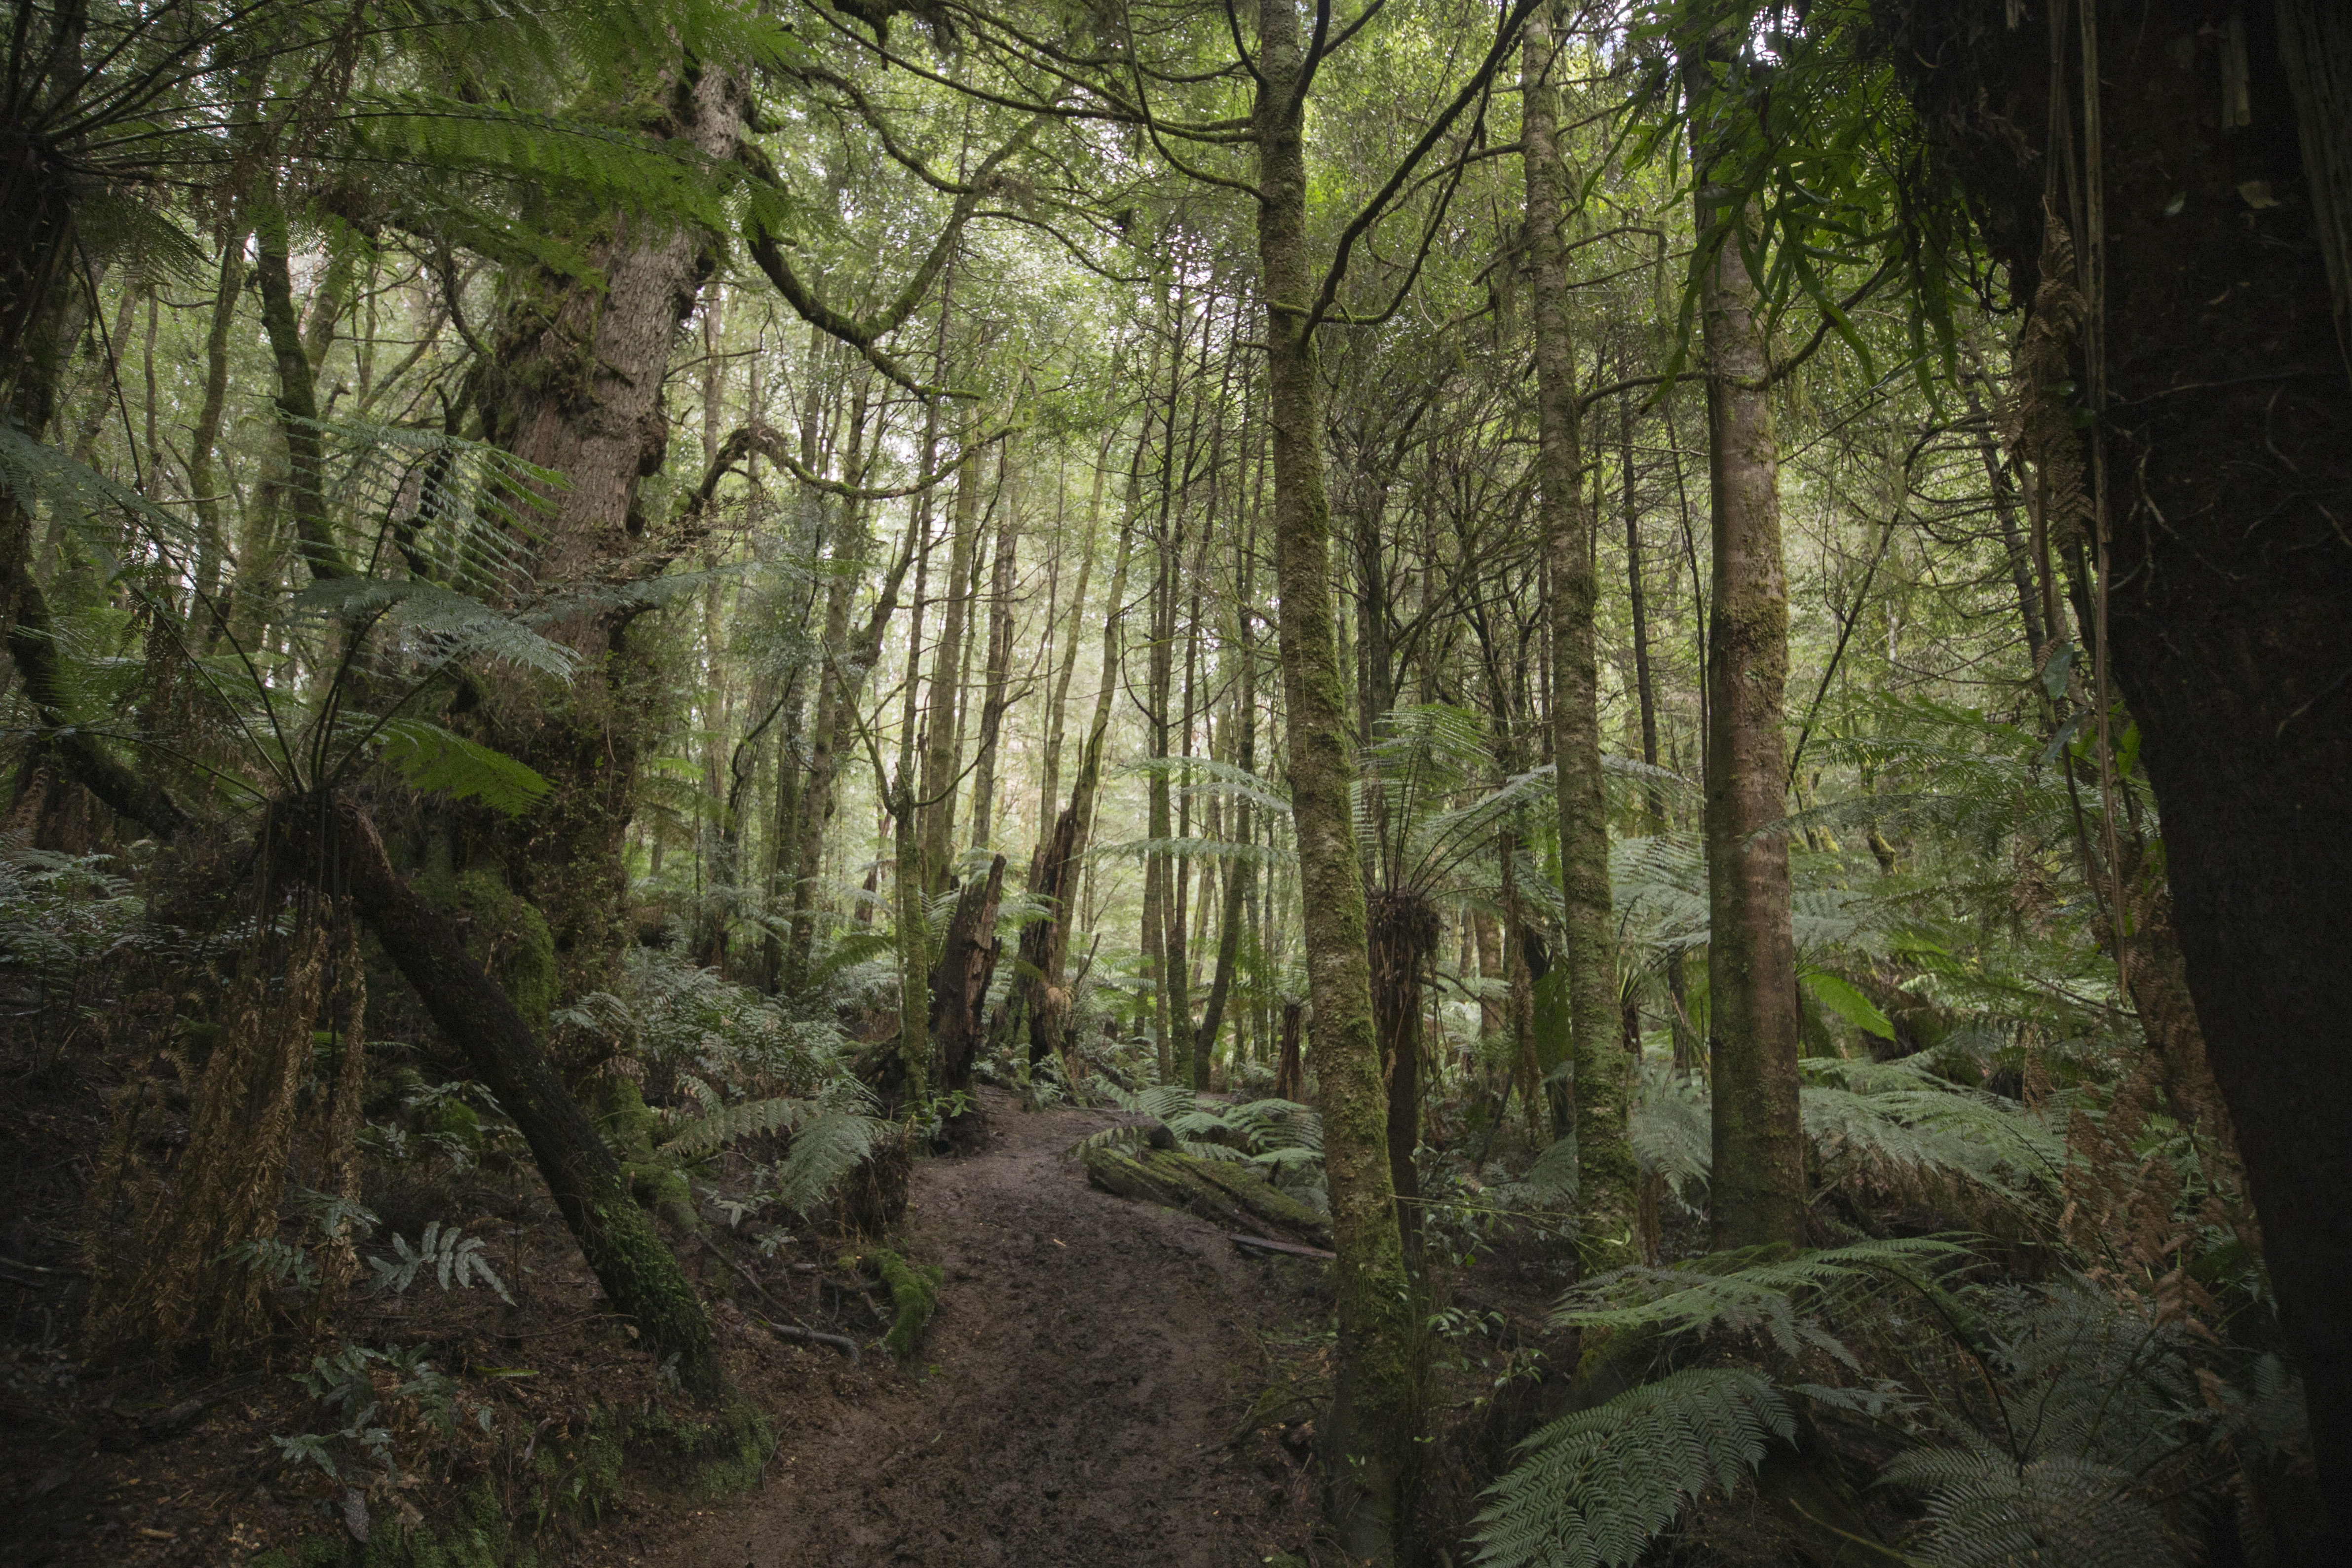 A walk in the pluvial forest of the Yarra Ranges National Park